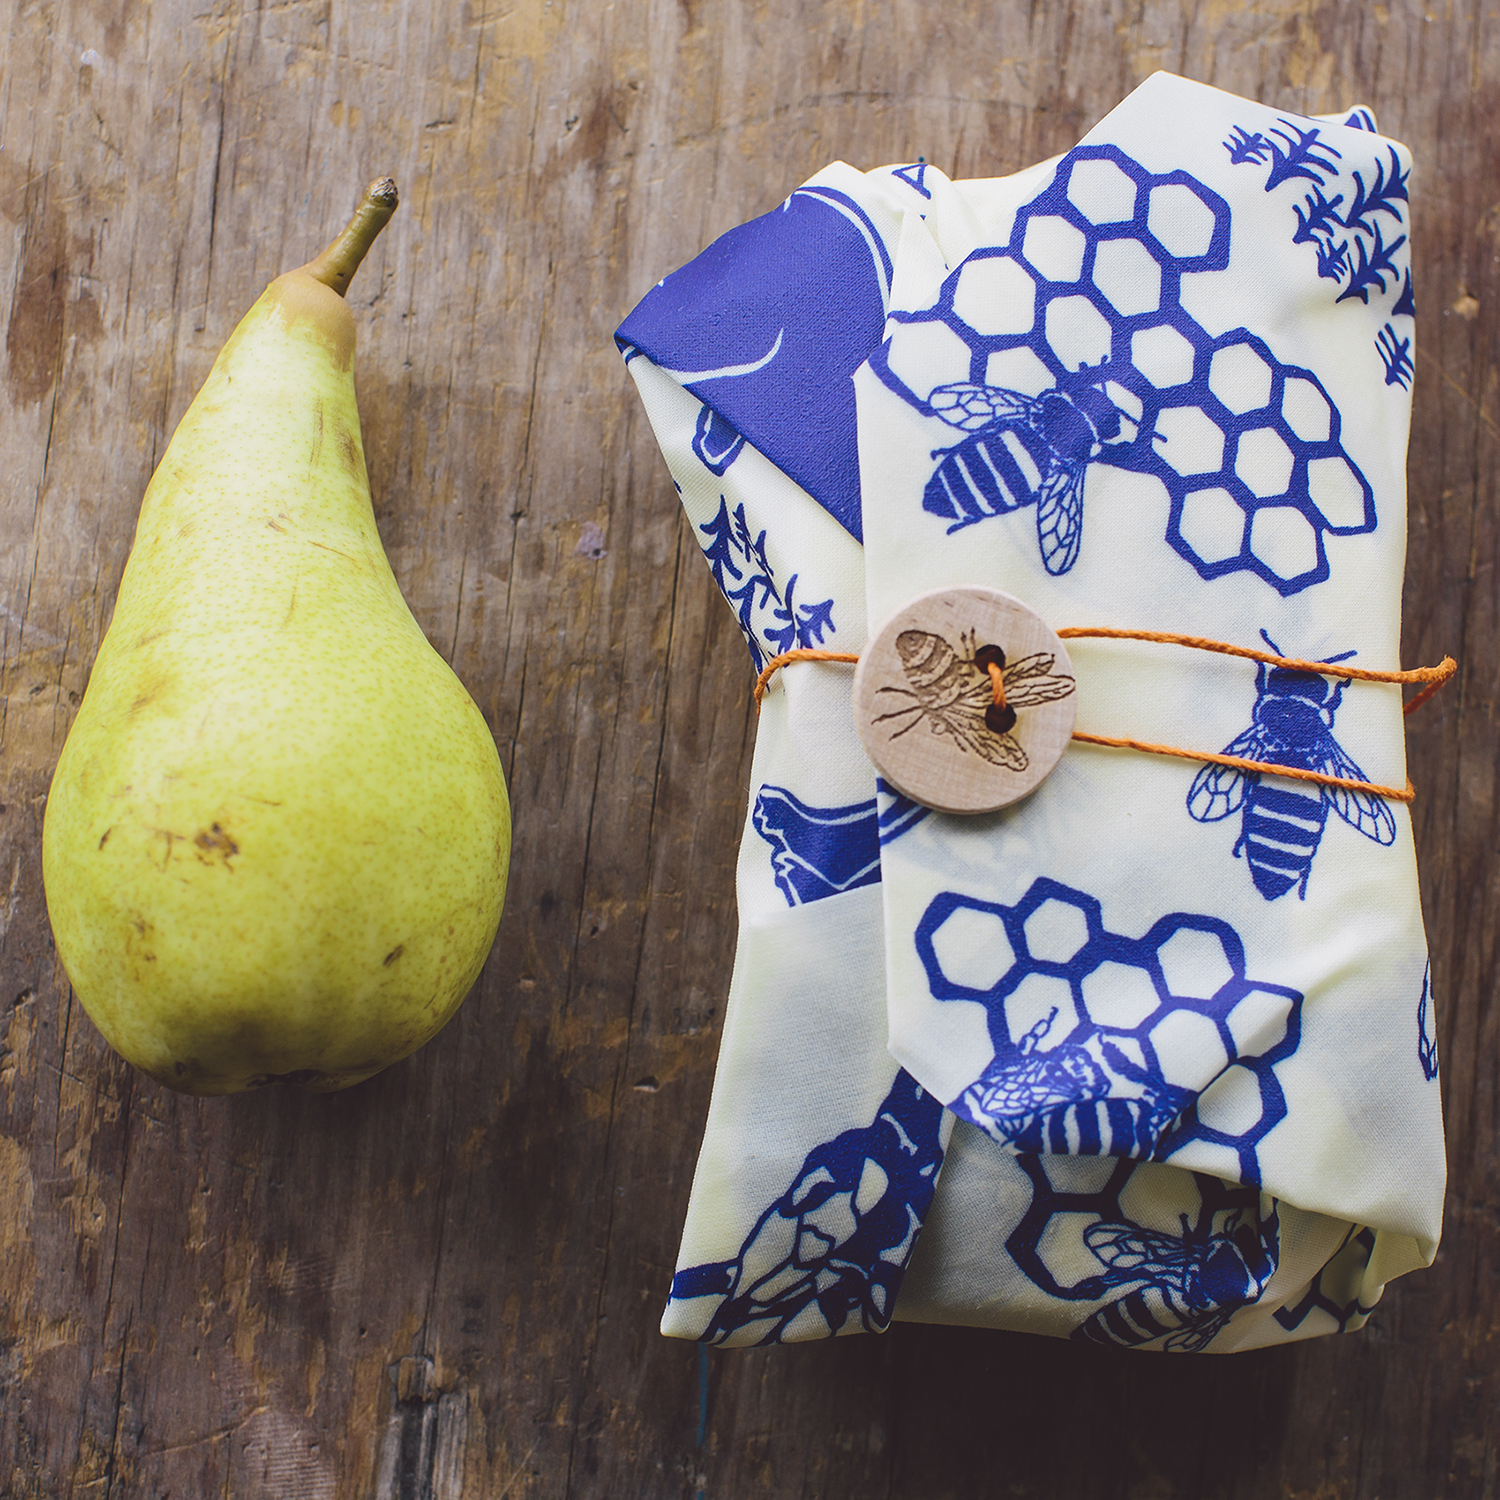 Bee's Wrap - Lunch Pack - with Certified Organic Cotton - Plastic and Silicone Free - Reusable Eco-Friendly Beeswax Food Wrap - Sandwich Wrap and 2 Medium Wraps - image 3 of 3